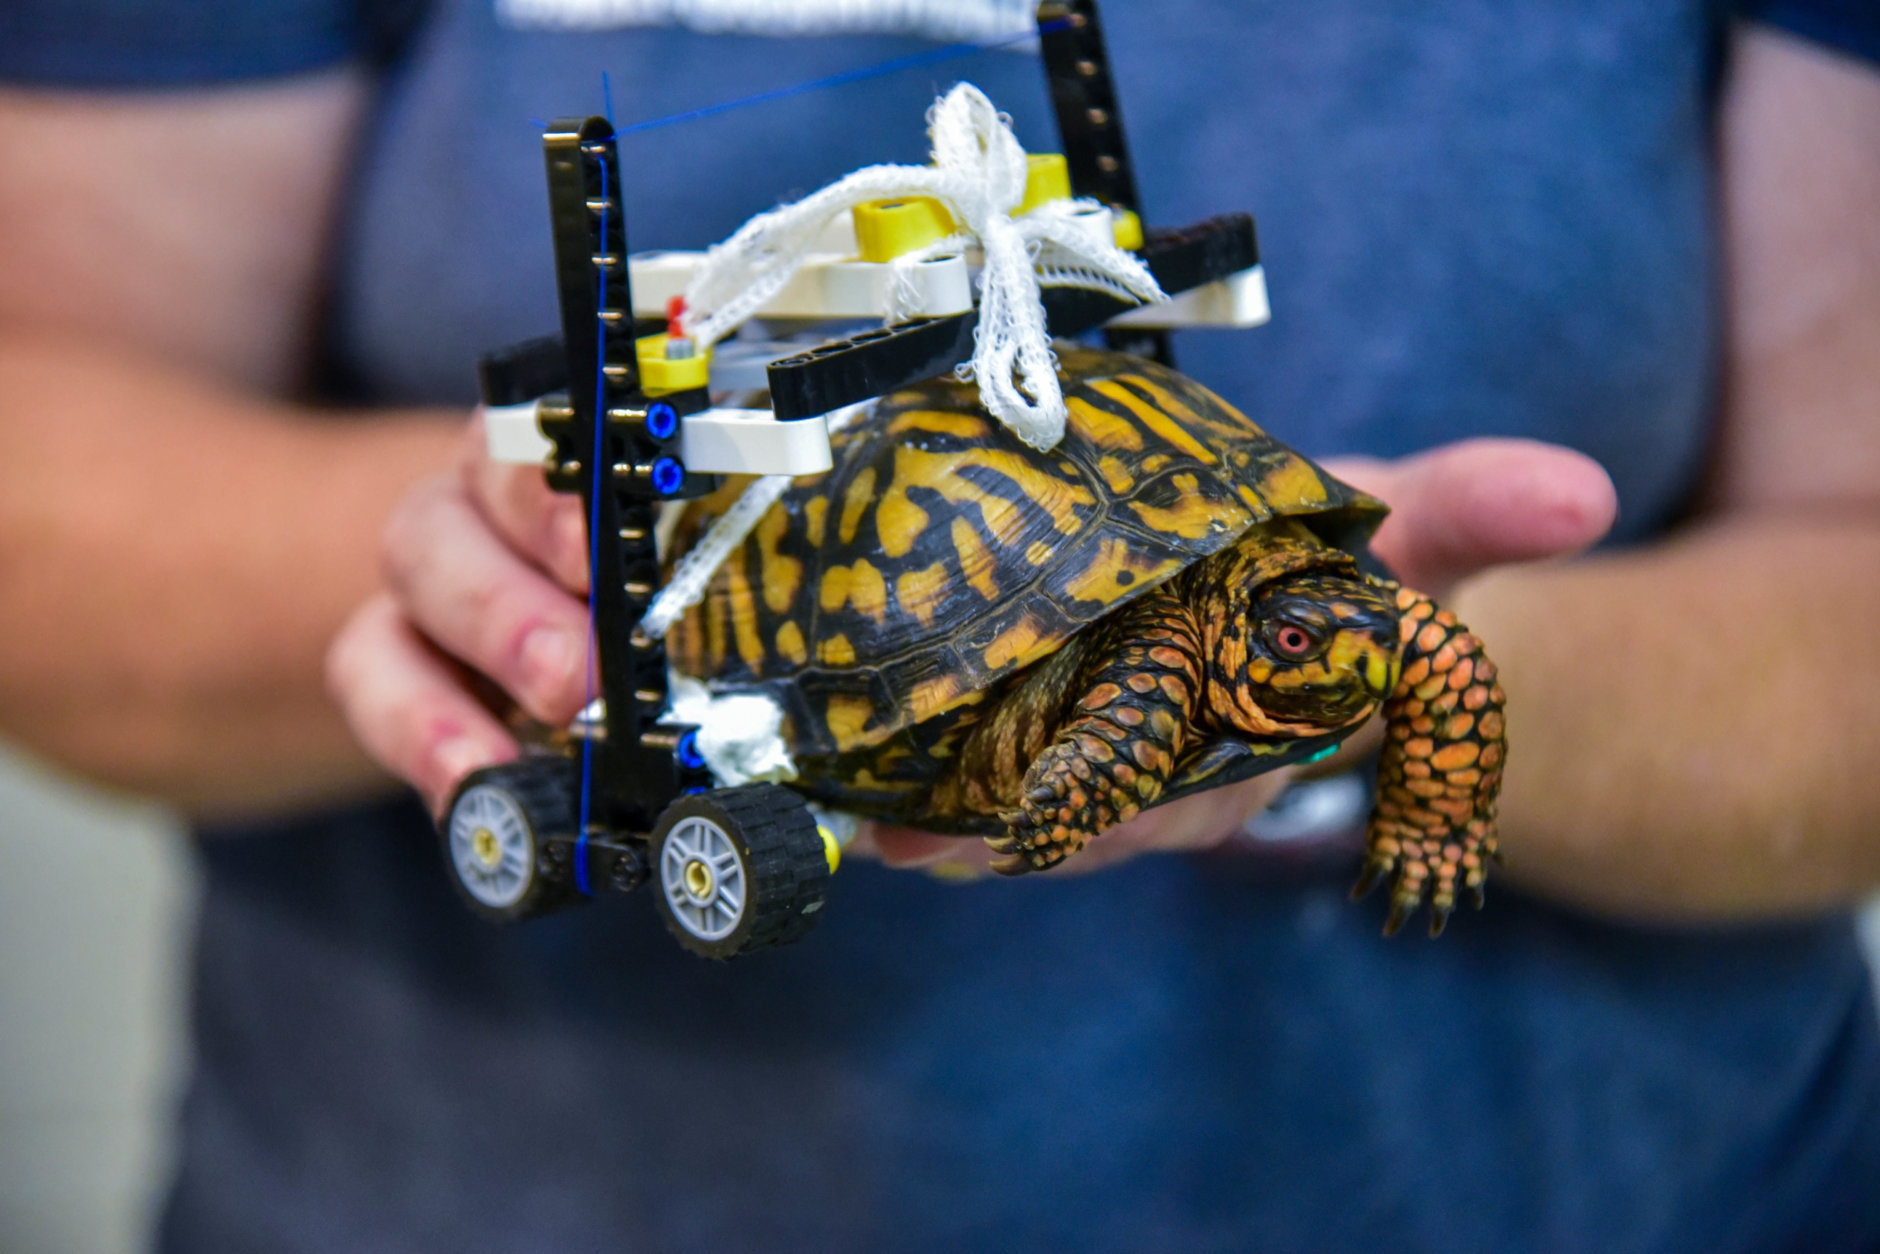 The wheelchair allows the bottom of the turtle's shell to be lifted off the ground so it could heal properly. (Courtesy Maryland Zoo/Sinclair Miller) 